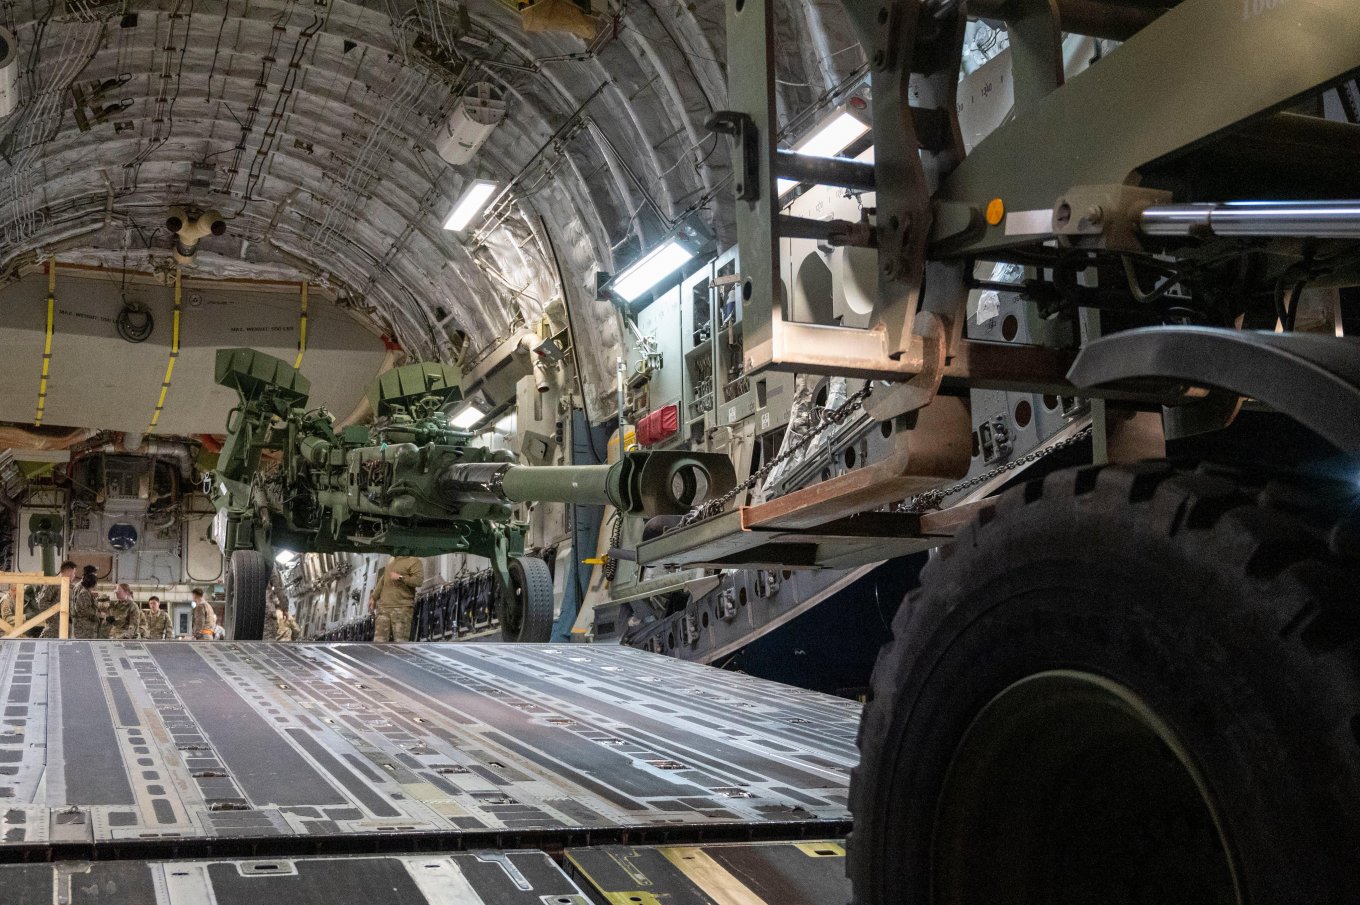 Another batch of M777s being loaded on a cargo plane to Ukraine